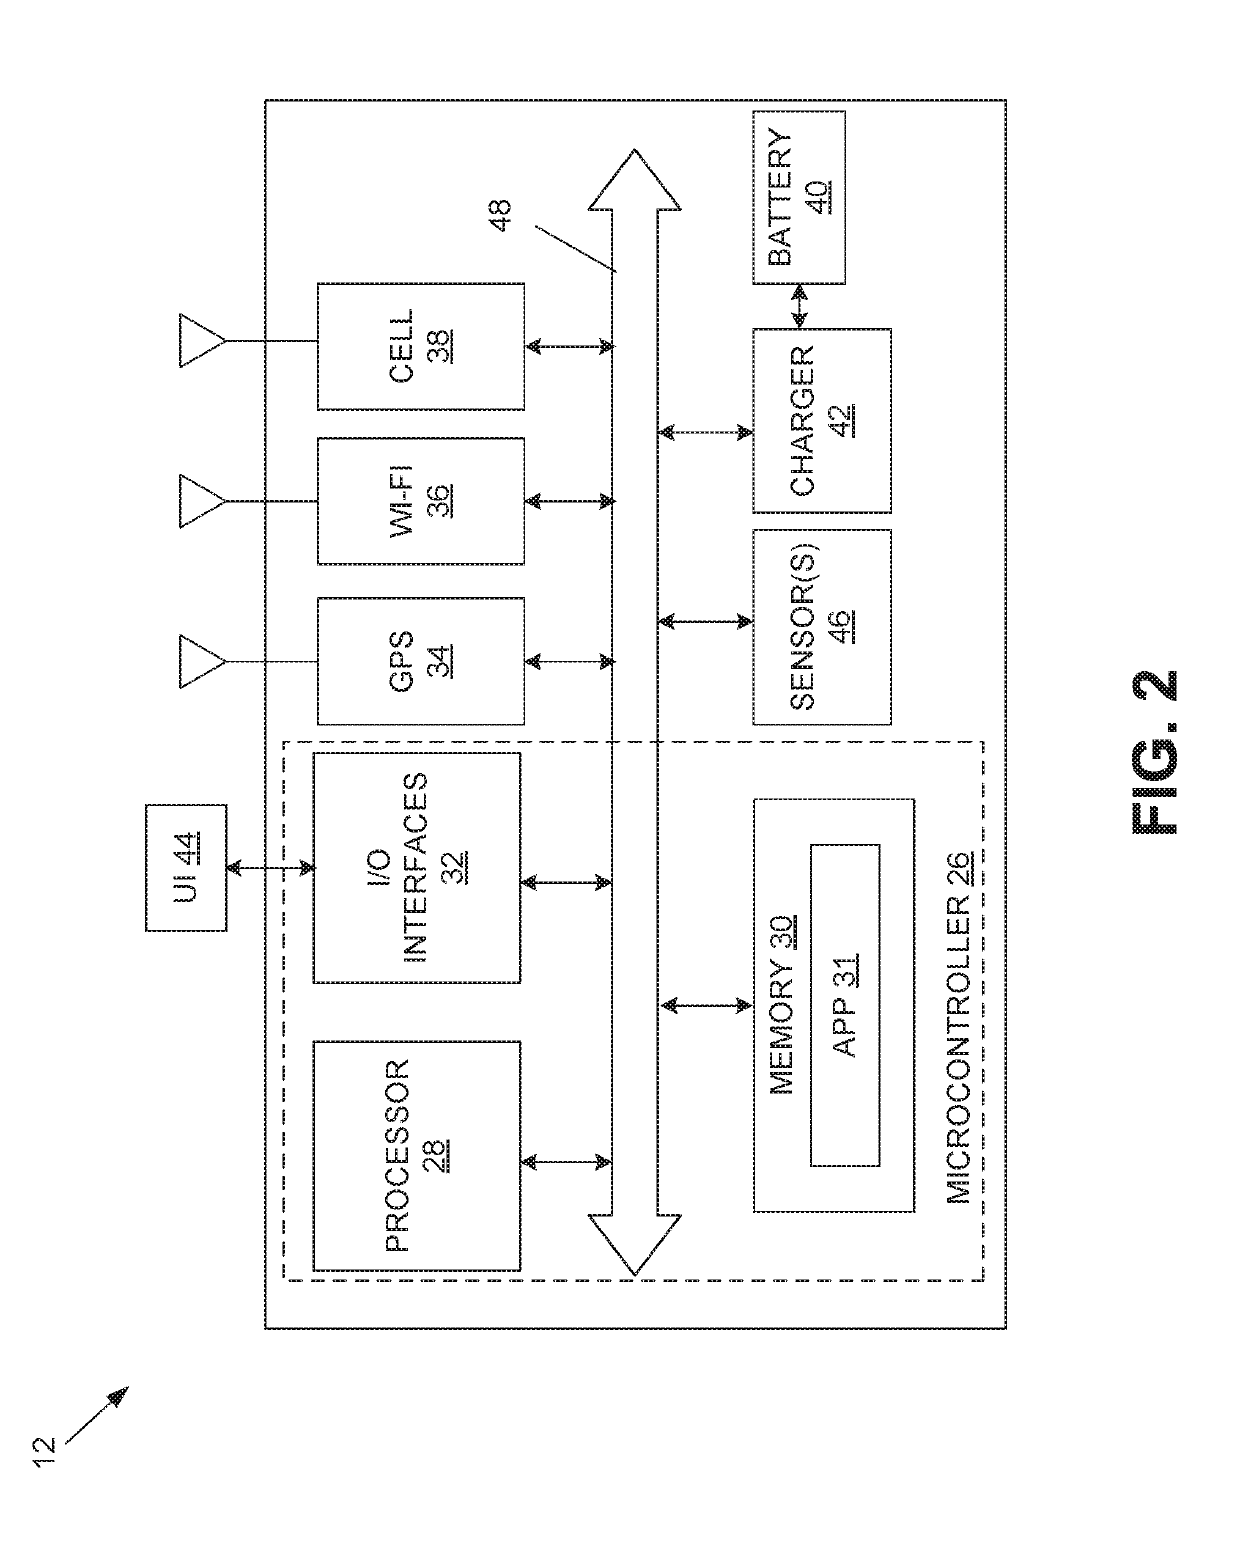 Wireless location recognition for wearable device